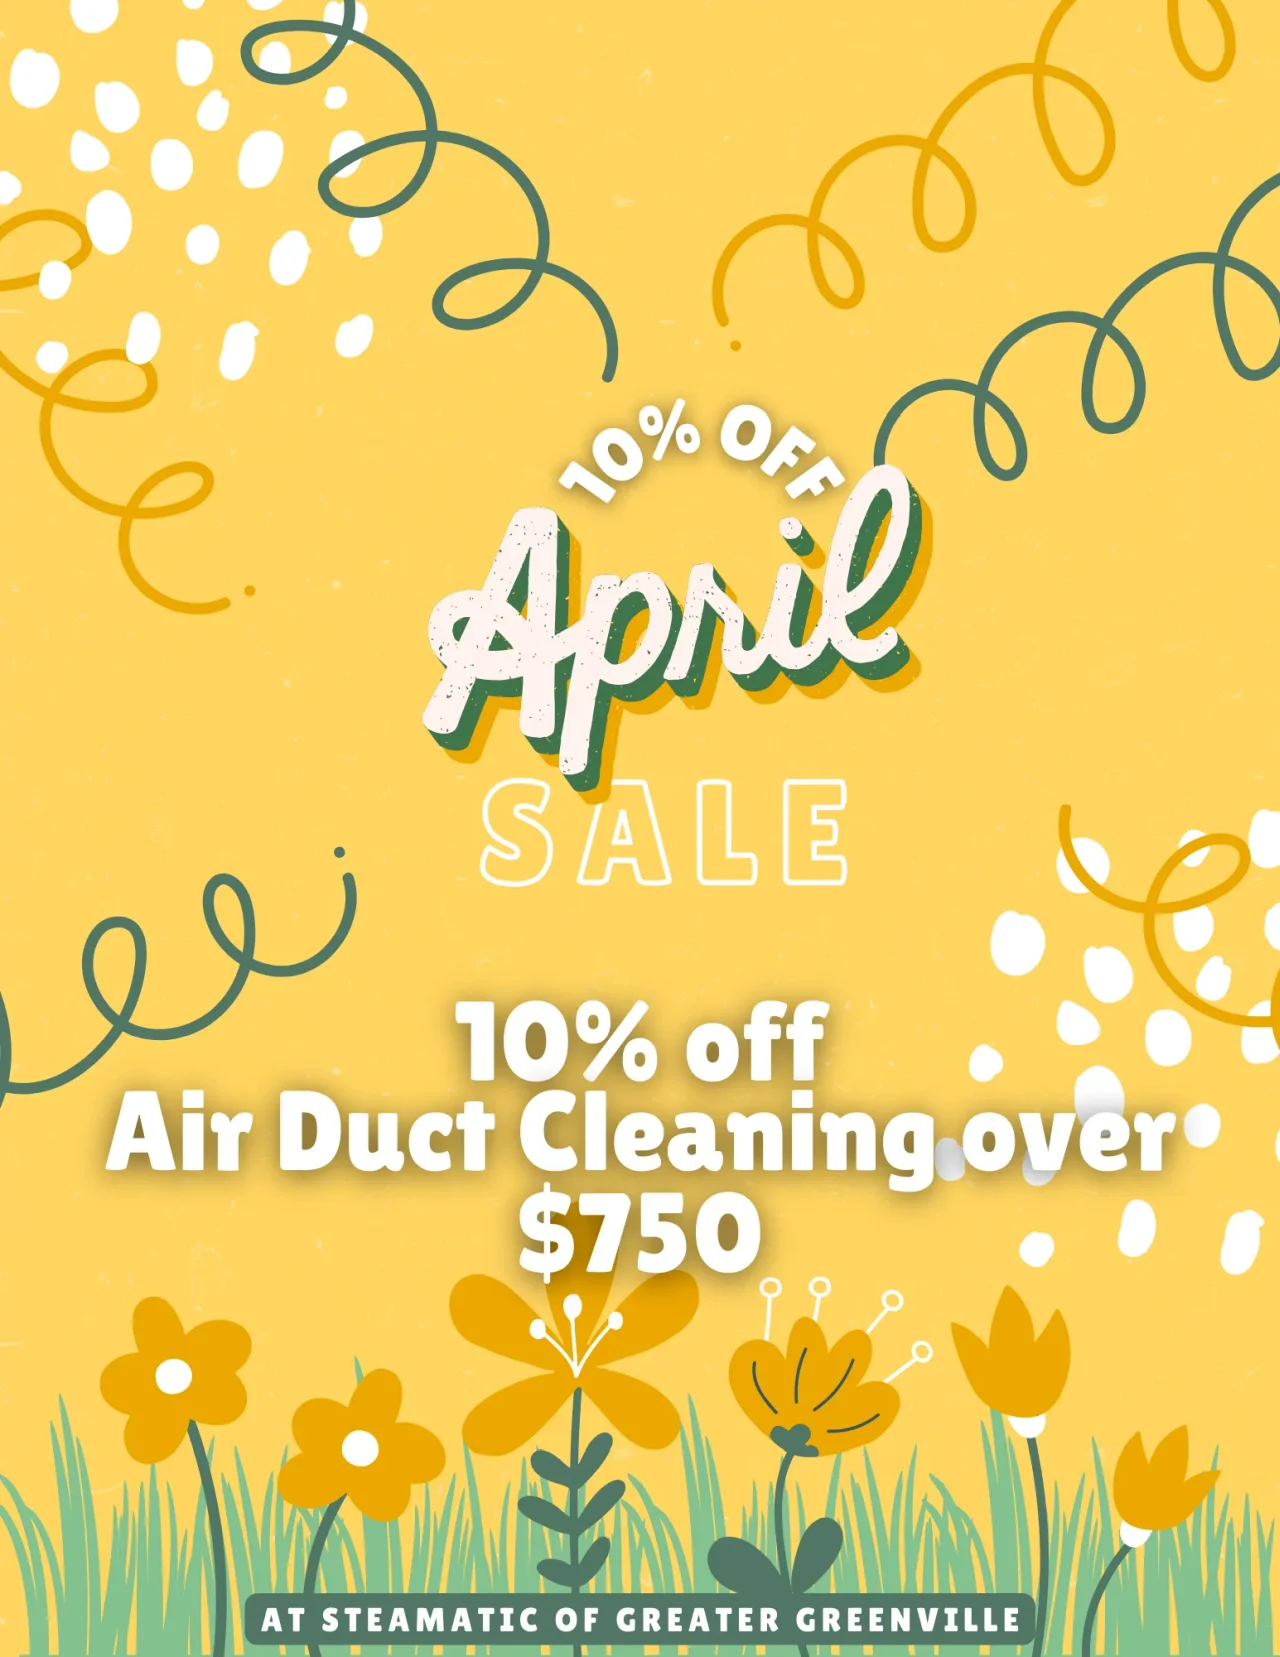 10% Off Air Duct Cleaning Over $750 - April Special Promo